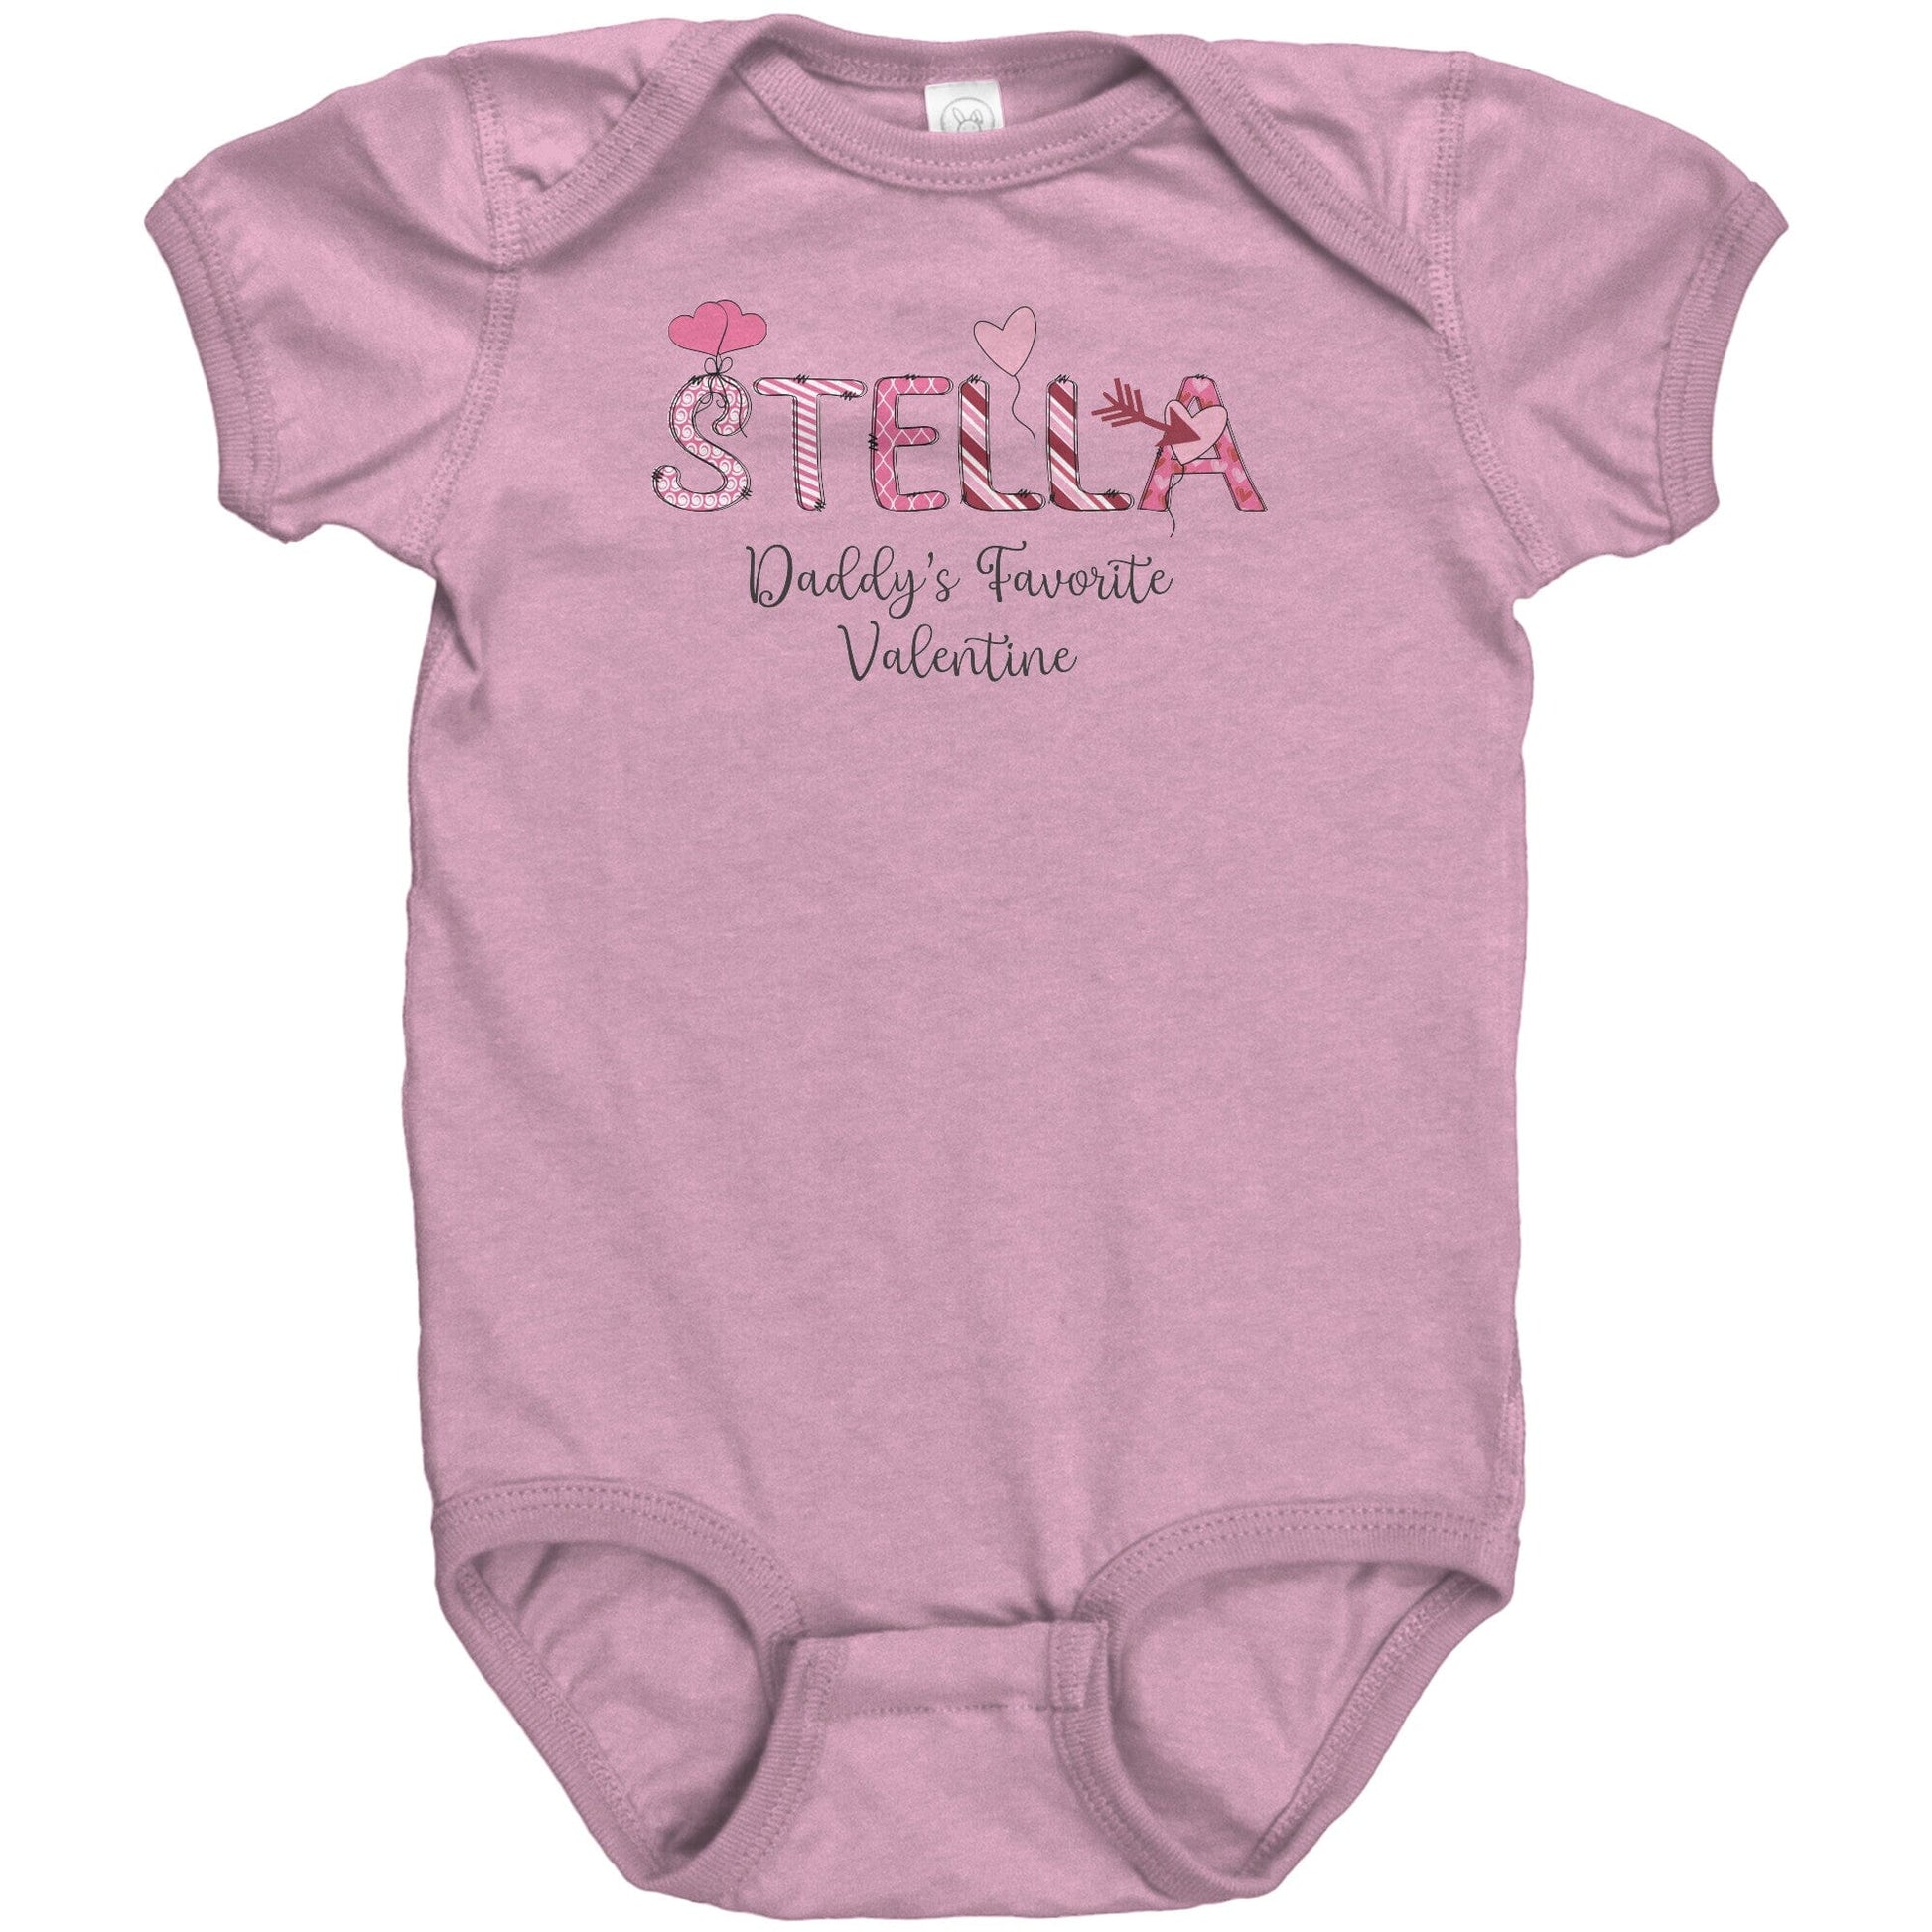 Baby's First Valentine's Day Outfit | Newborn Monogrammed Romper | Baby Girl Onesie | Personalized Daddy's Favorite 1st Valentine Day Outfit Apparel teelaunch Pink NB 